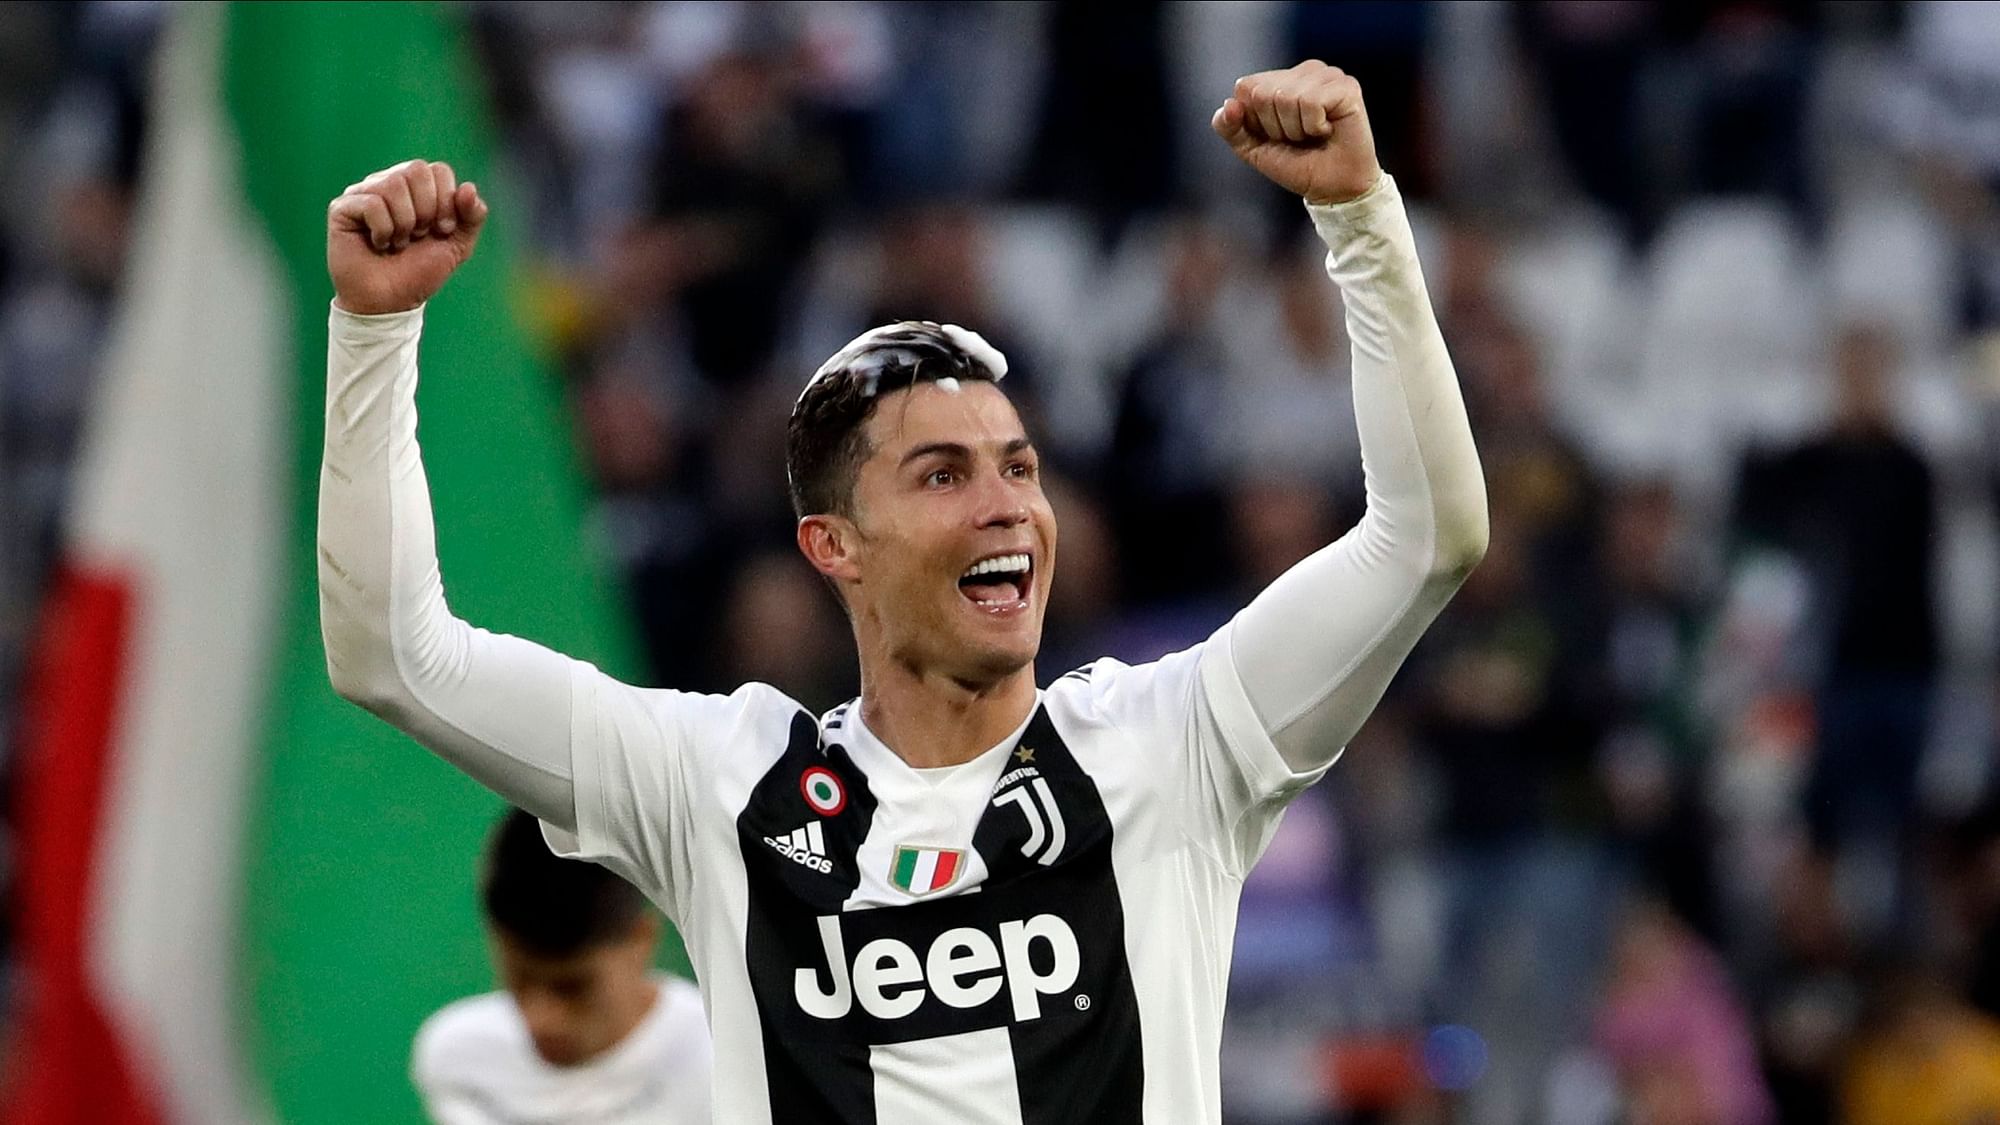 Ronaldo became the first player in history to win league titles in the English Premier League (with United), the Spanish league (Madrid) and Serie A (Juventus).